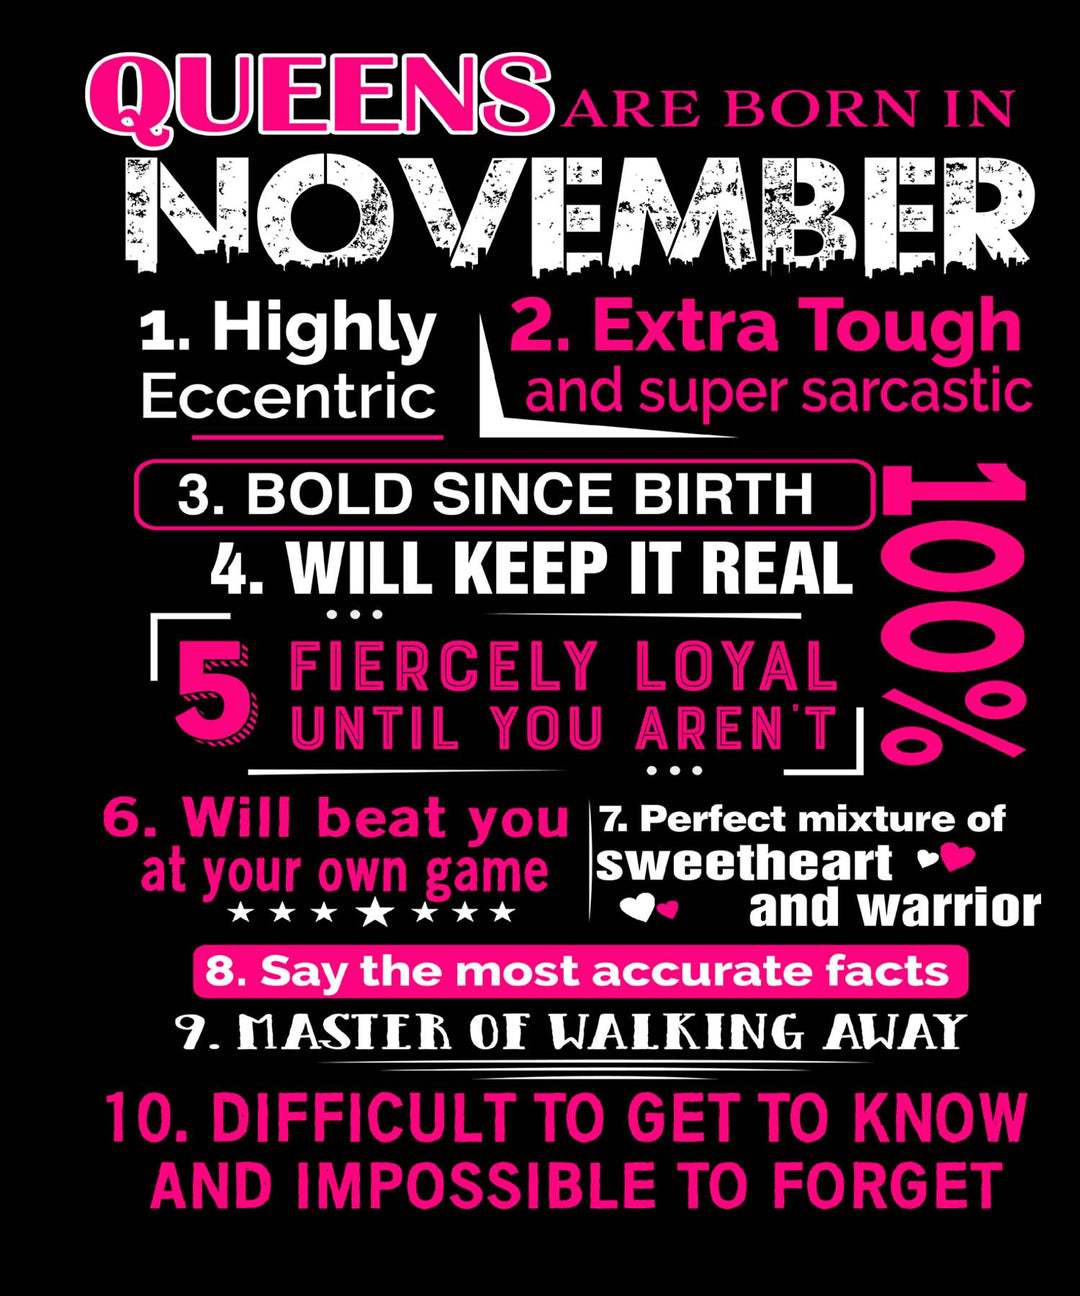 10 REASONS QUEENS ARE BORN IN NOVEMBER, GET BIRTHDAY BASH 50% OFF PLUS (FLAT SHIPPING)